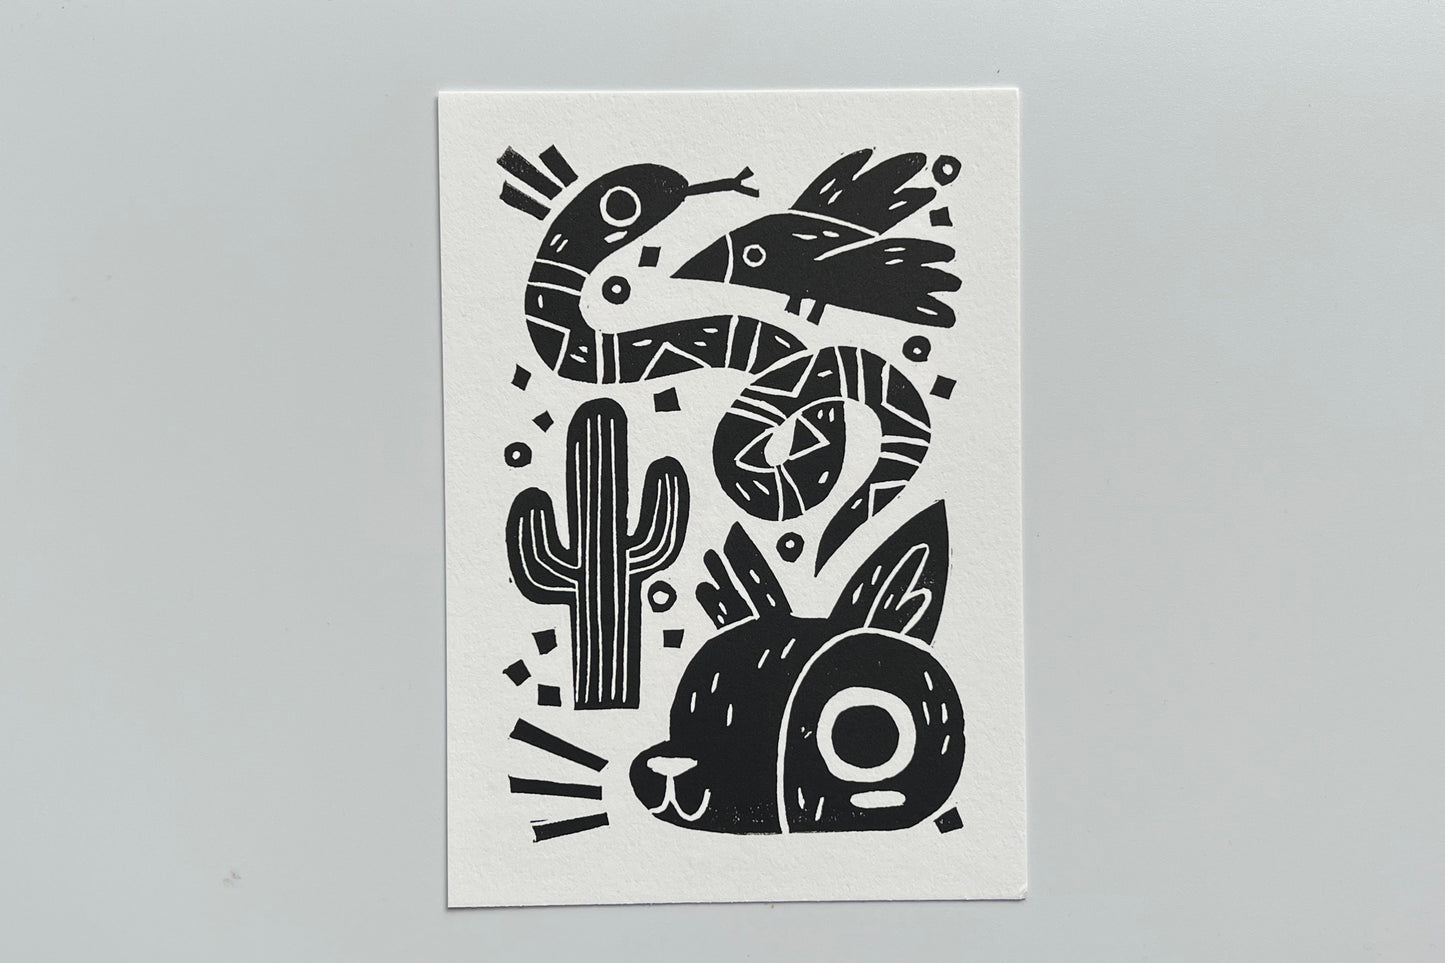 Black ink block print of a bird, snake, cactus, and coyote.